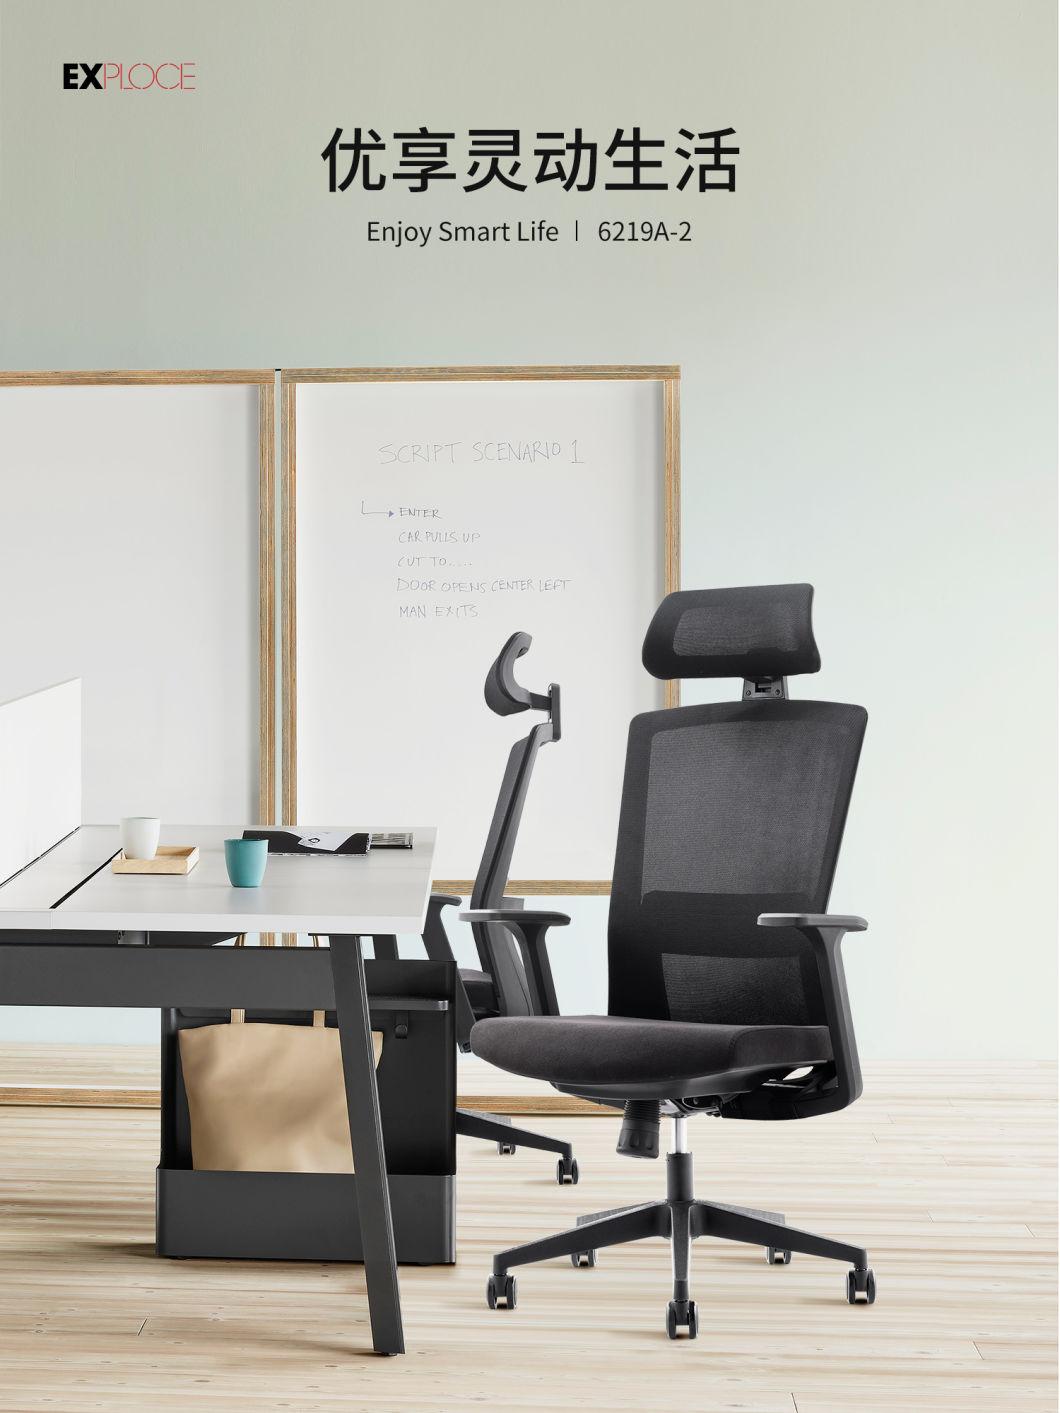 Factory Price Unfolded Foshan Mesh Chair Swivel Boss Computer Parts Office Furniture